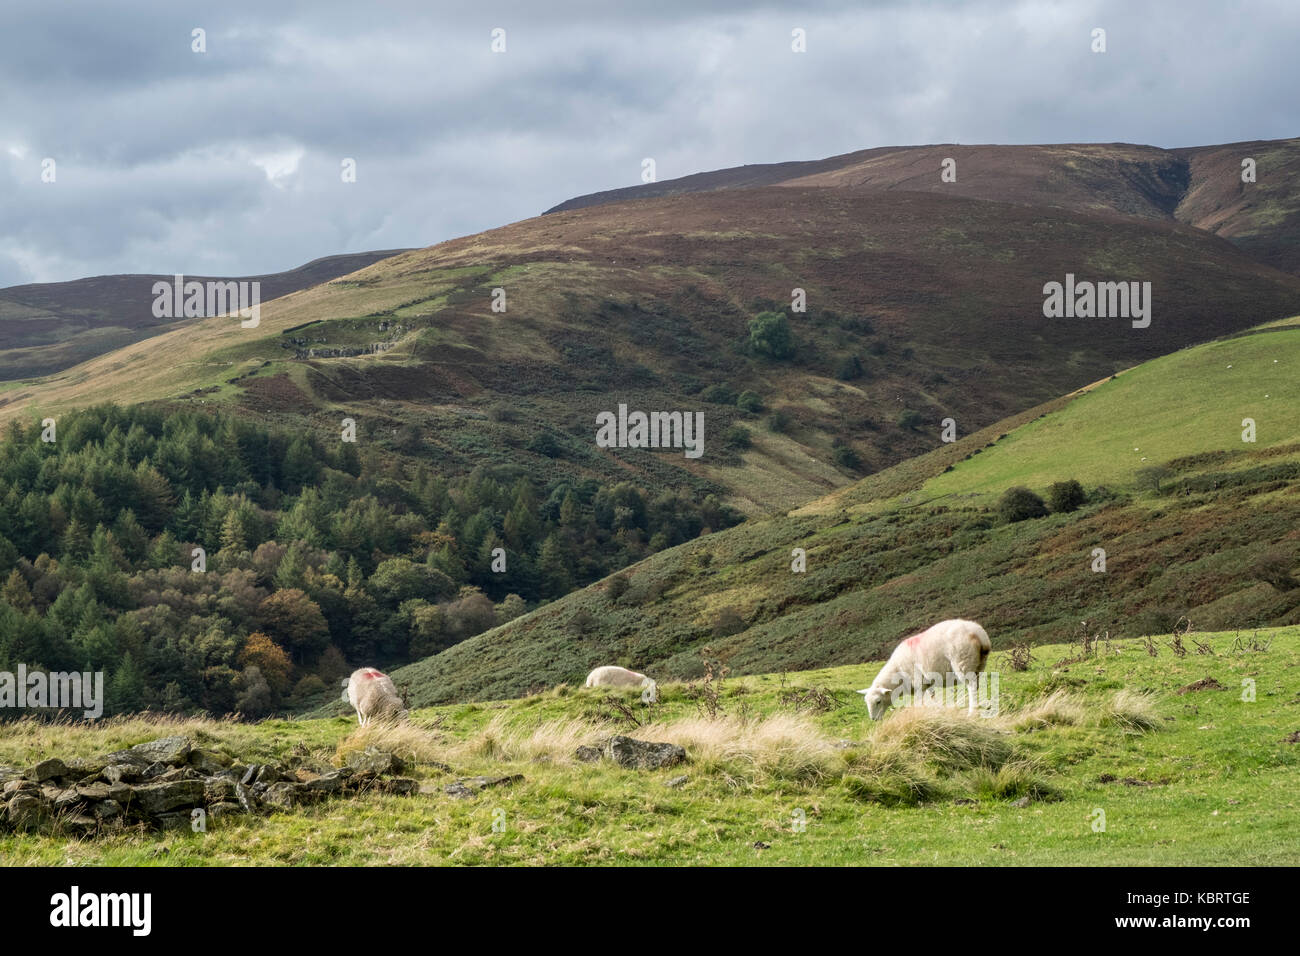 Sheep grazing in sunshine with dark clouds approaching, on the hills around Jaggers Clough, Derbyshire, Peak District National Park, England, UK Stock Photo